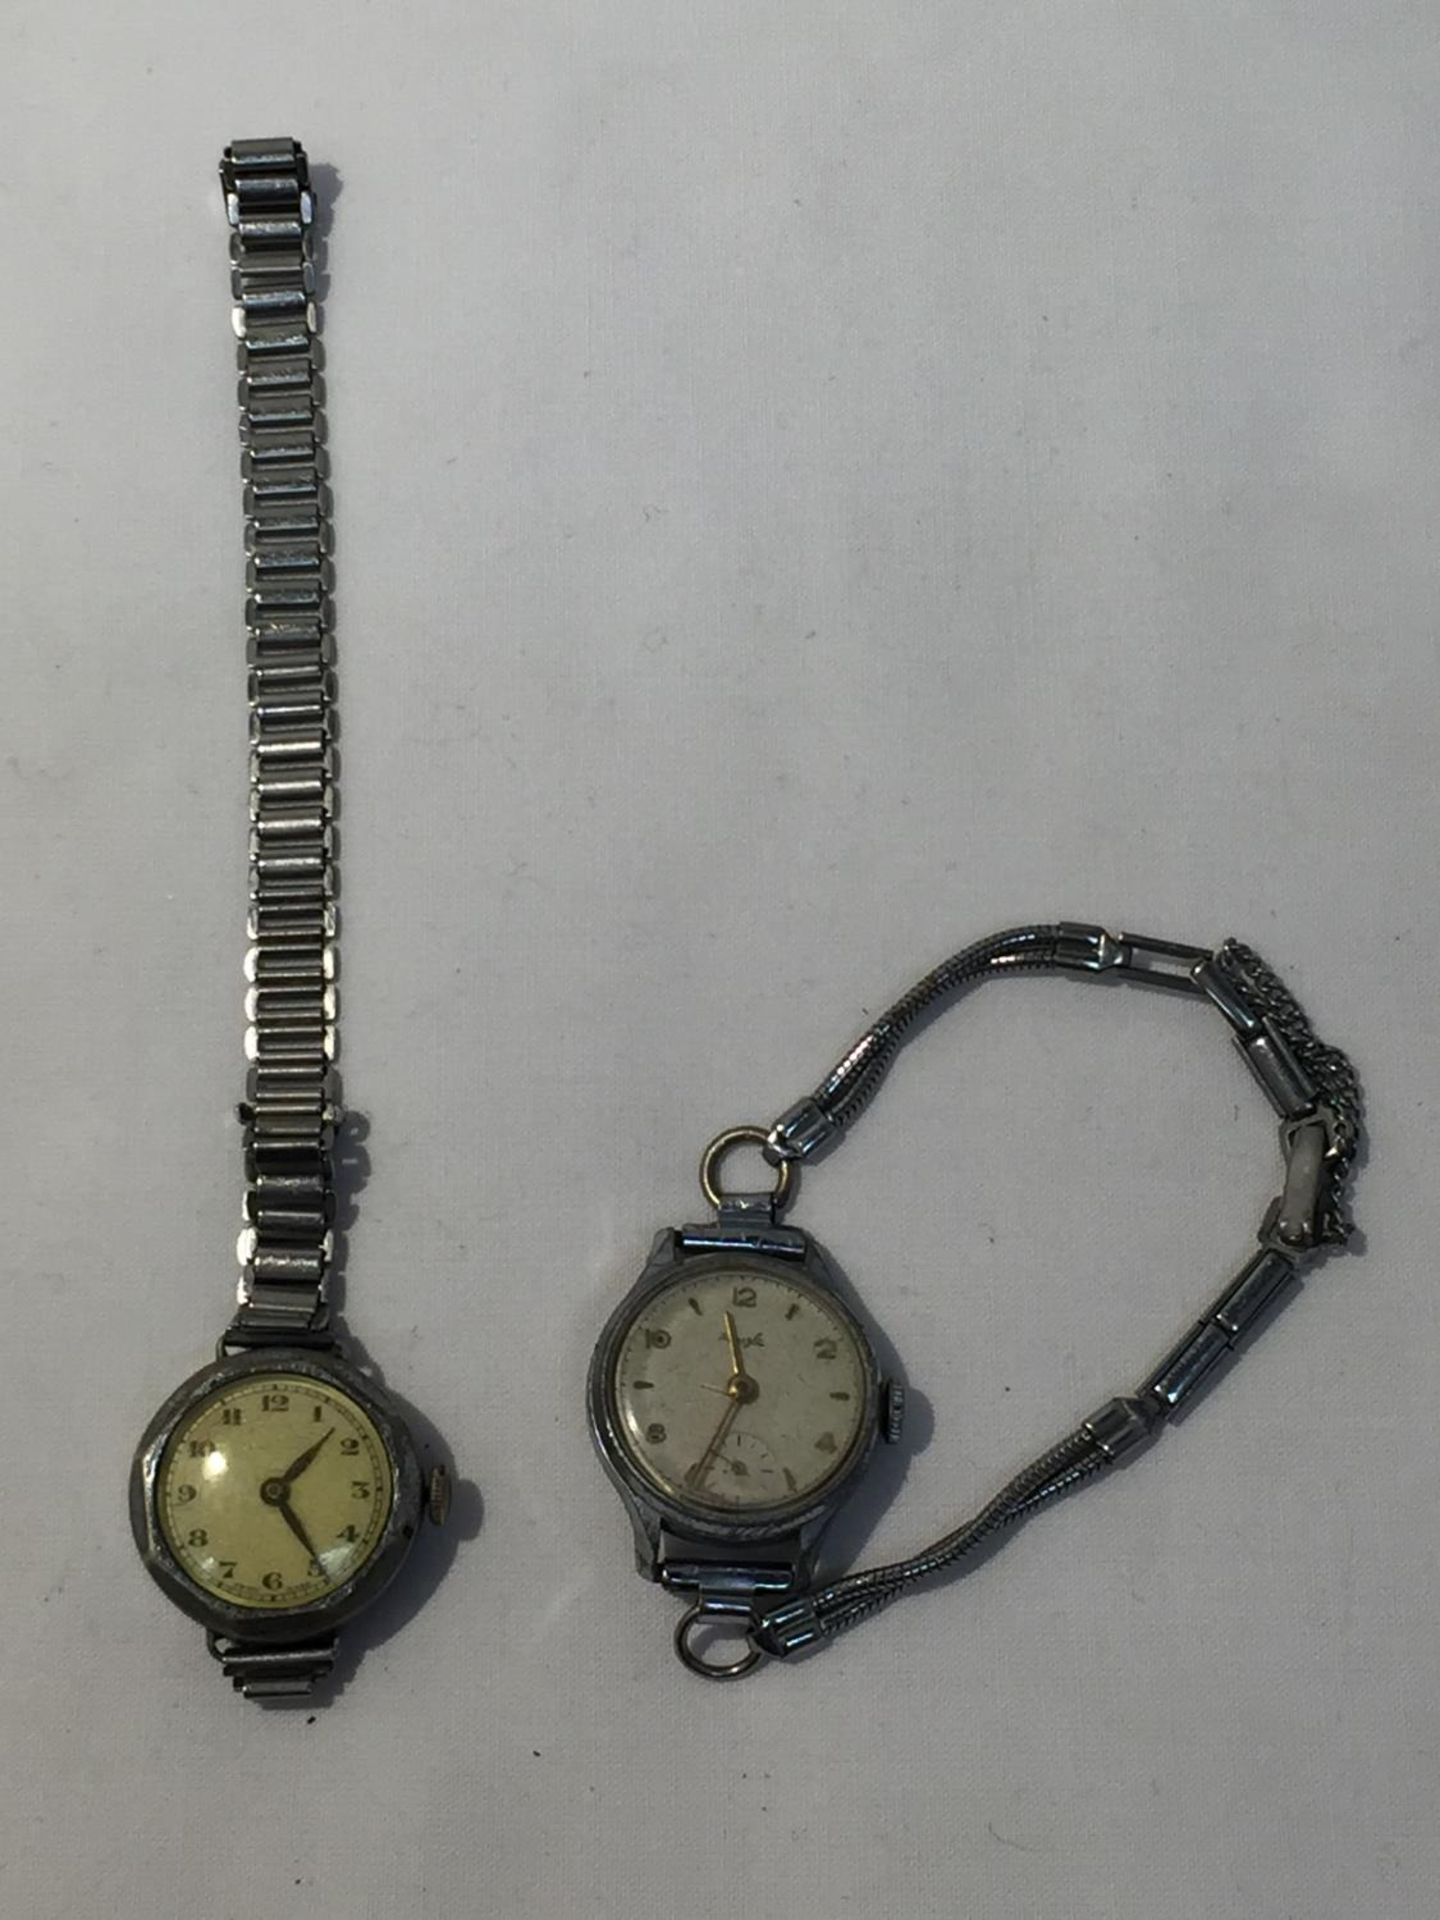 TWO WWI TRENCH WATCHES SEEN WORKING BUT NO WARRANTY